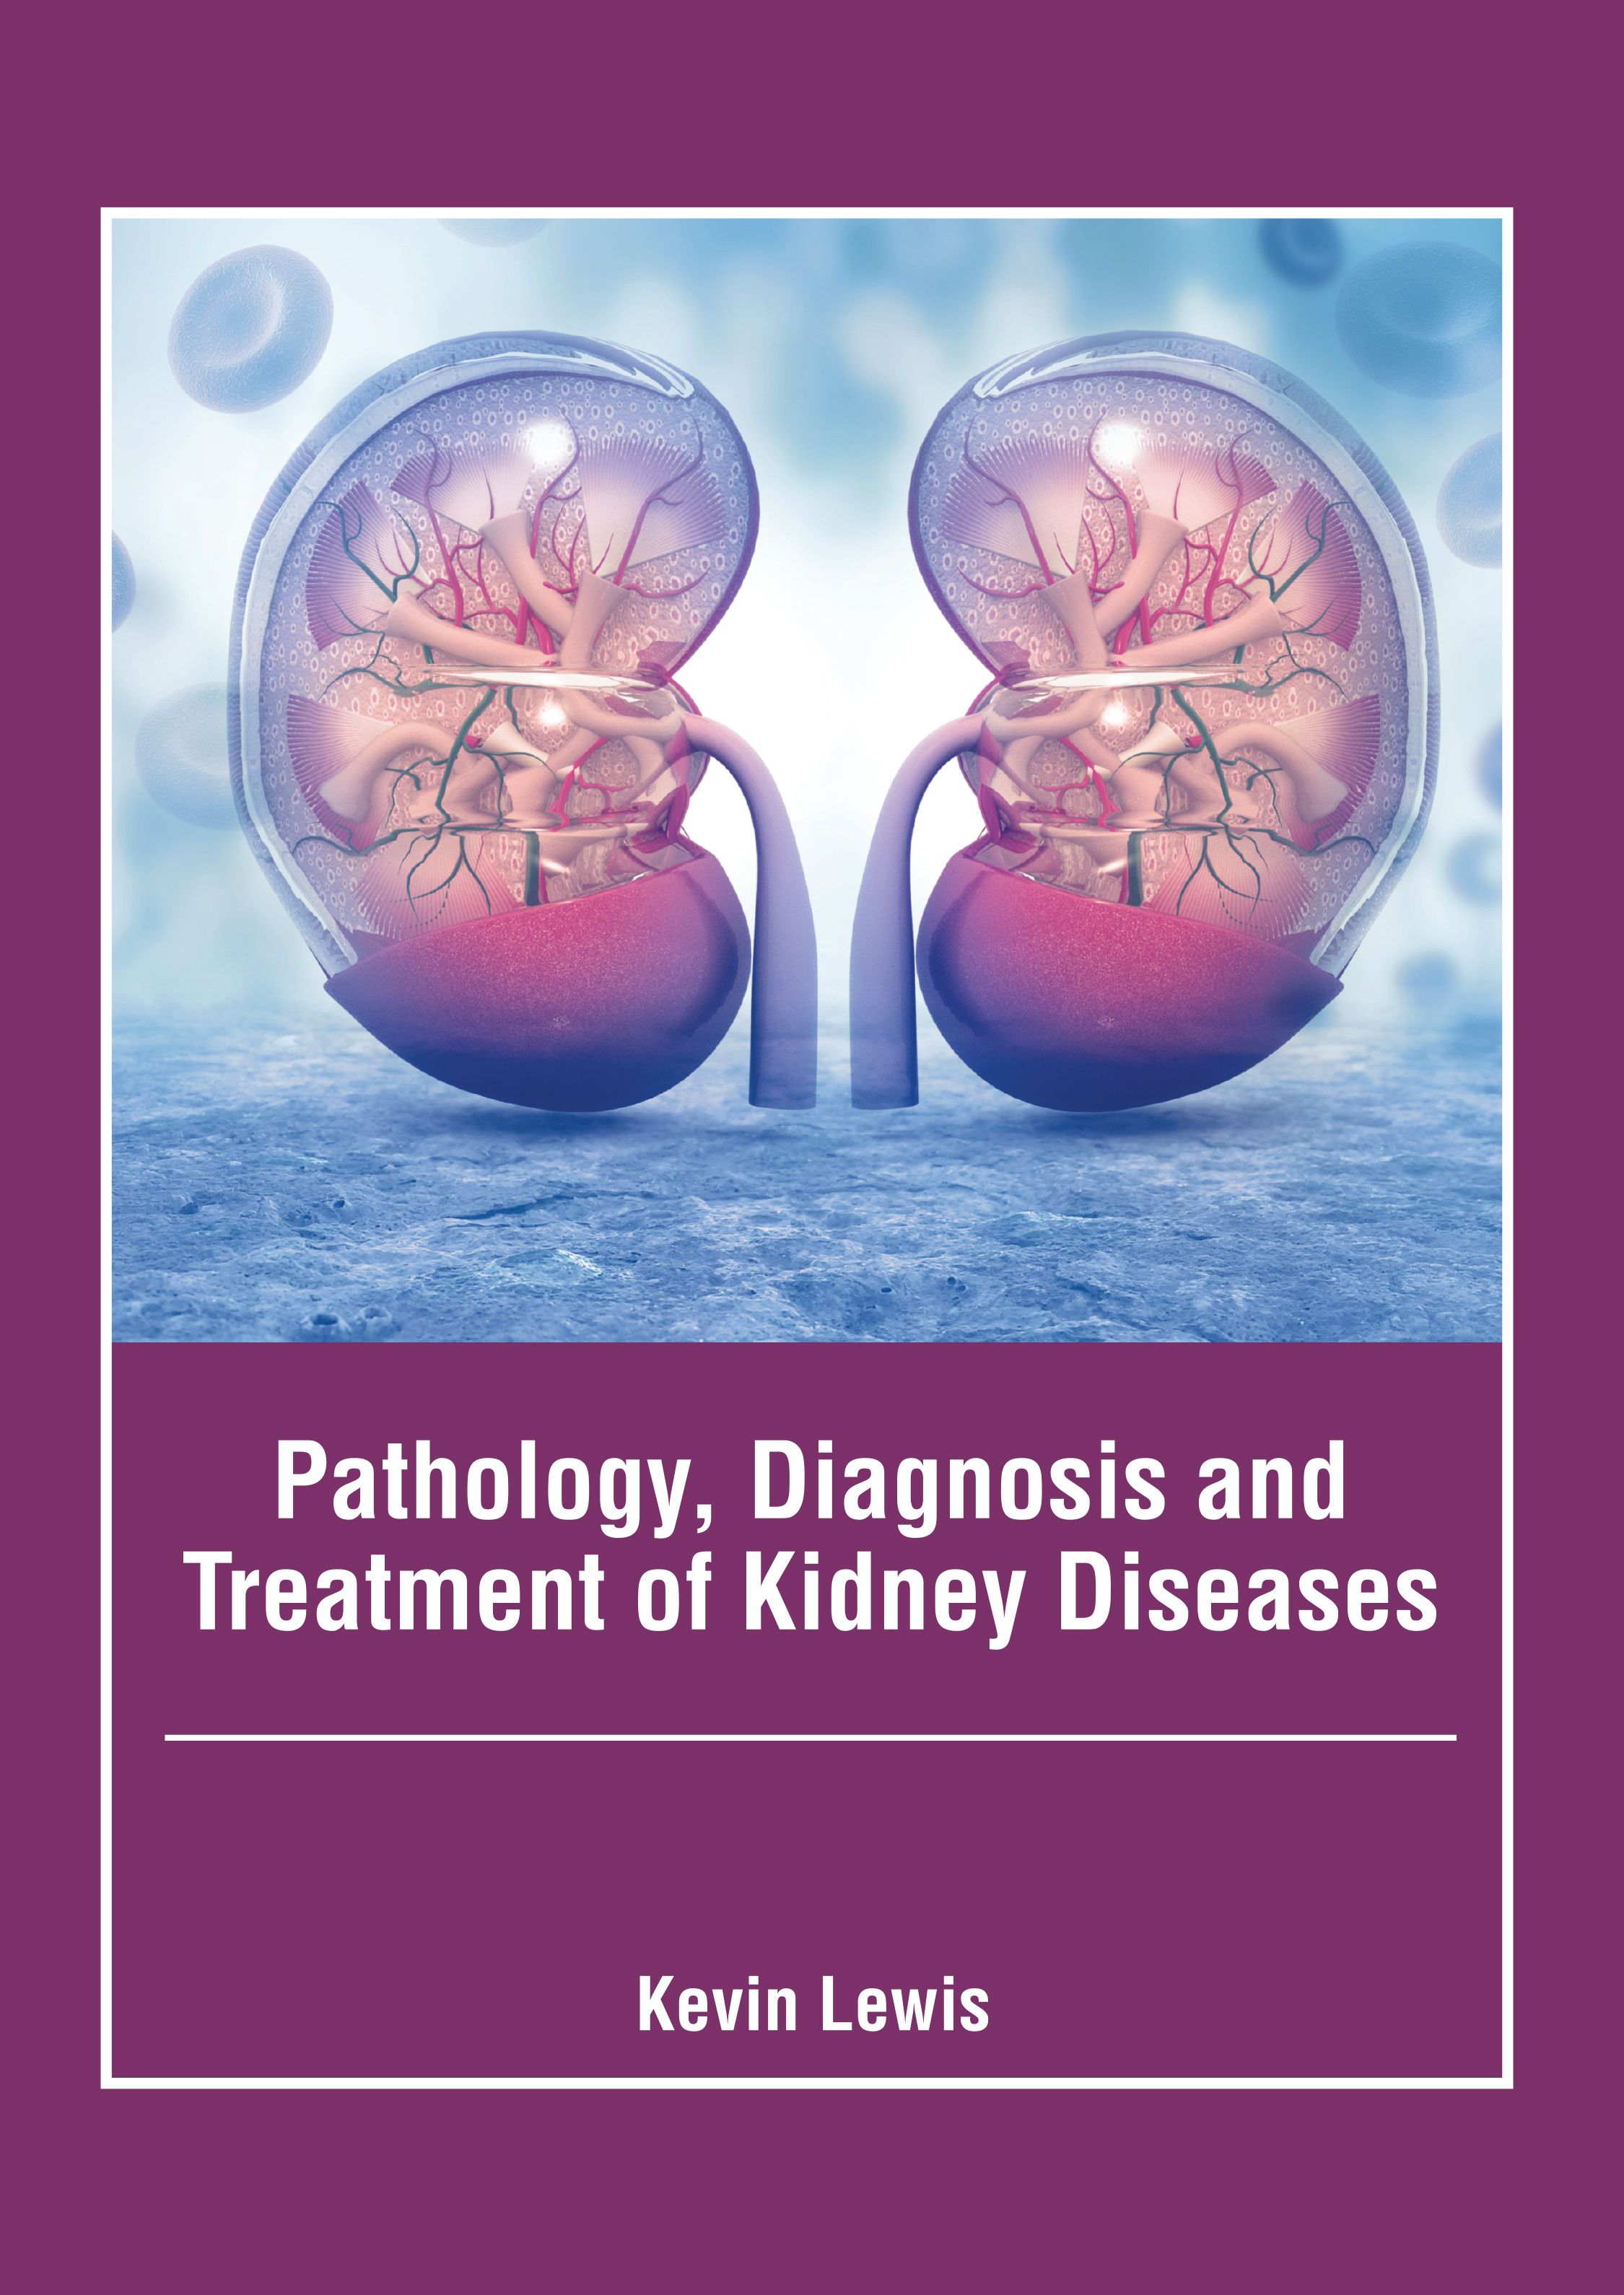 

medical-reference-books/nephrology/pathology-diagnosis-and-treatment-of-kidney-diseases-9781639277117